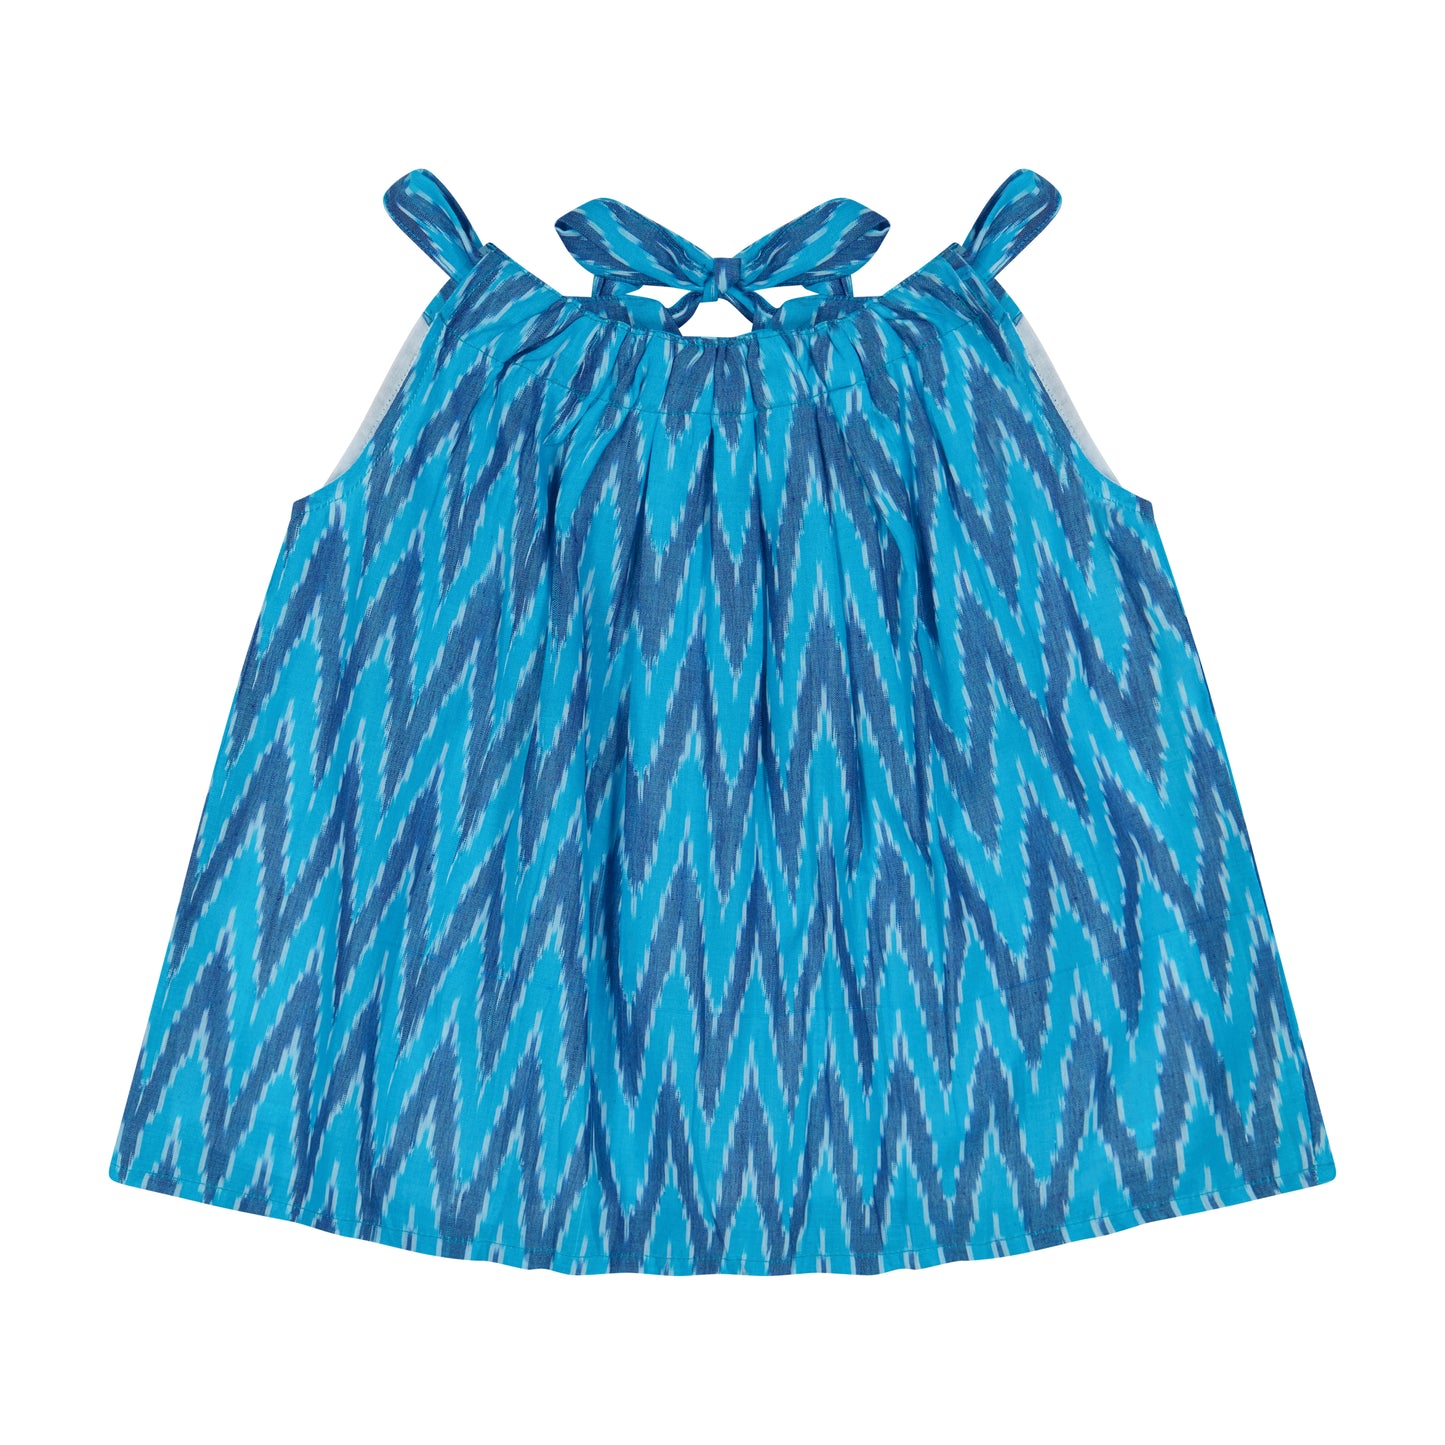 Colette Girl's Top And Short Set Turquoise Blue Ikat - final sale